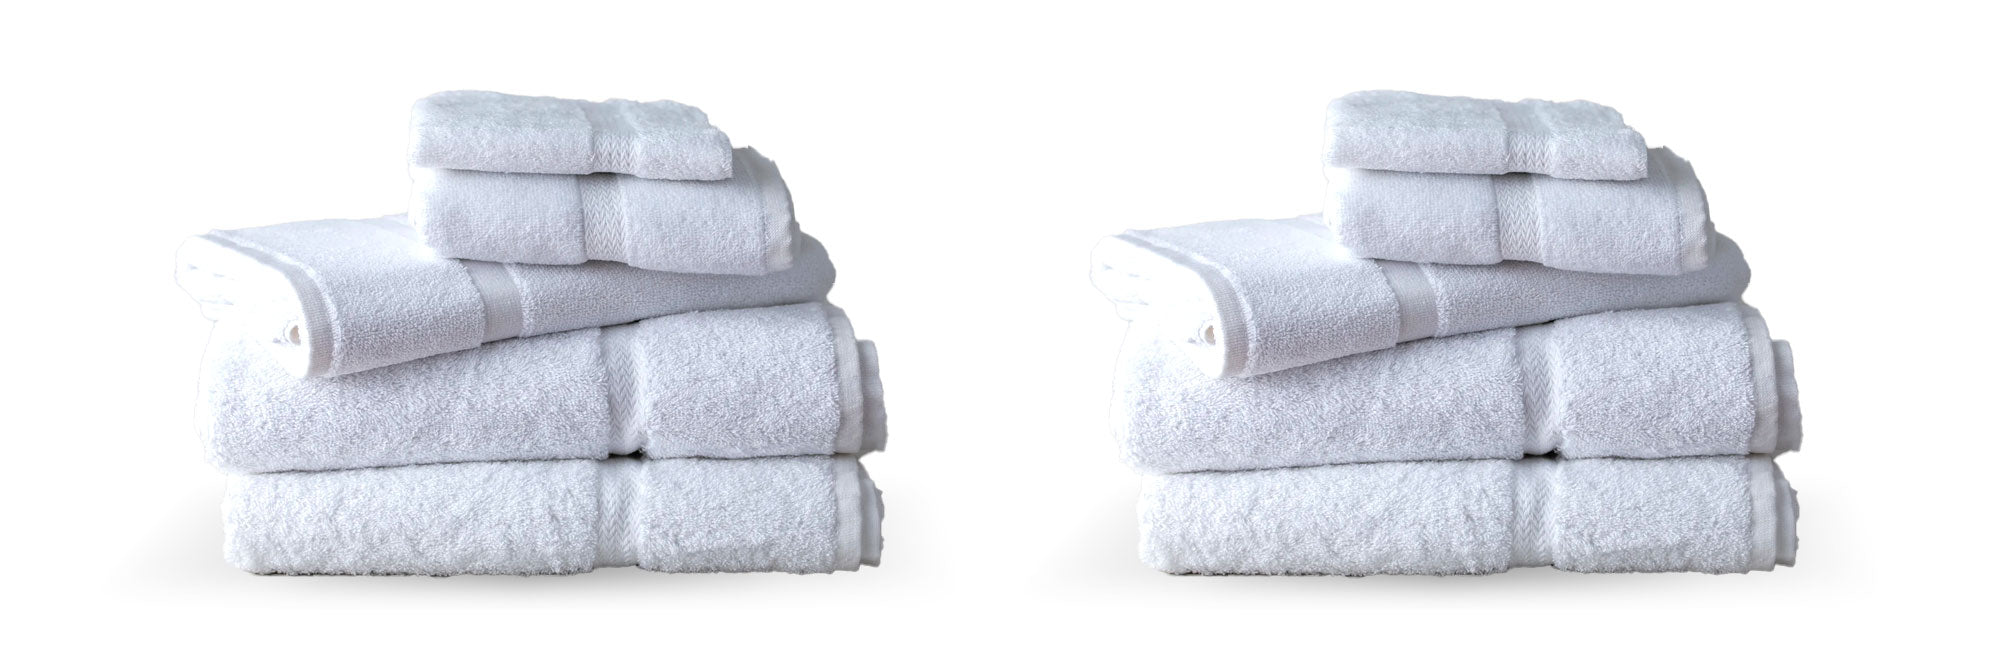 Berry Compliant Towels, American Blanket Company